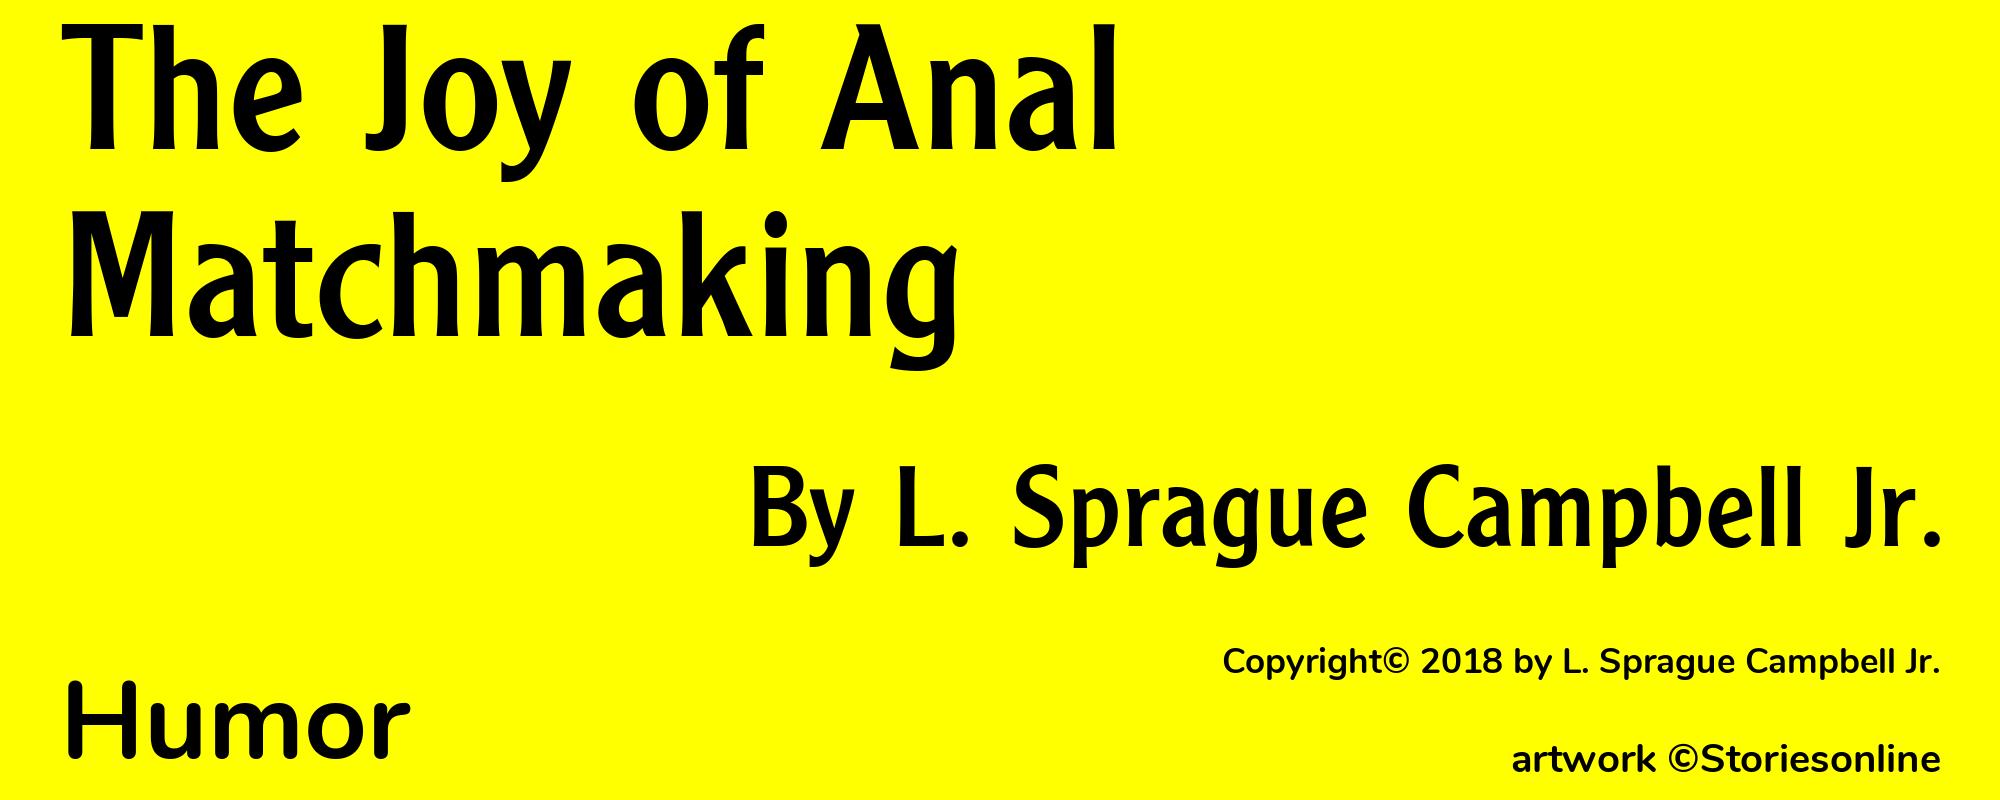 The Joy of Anal Matchmaking - Cover